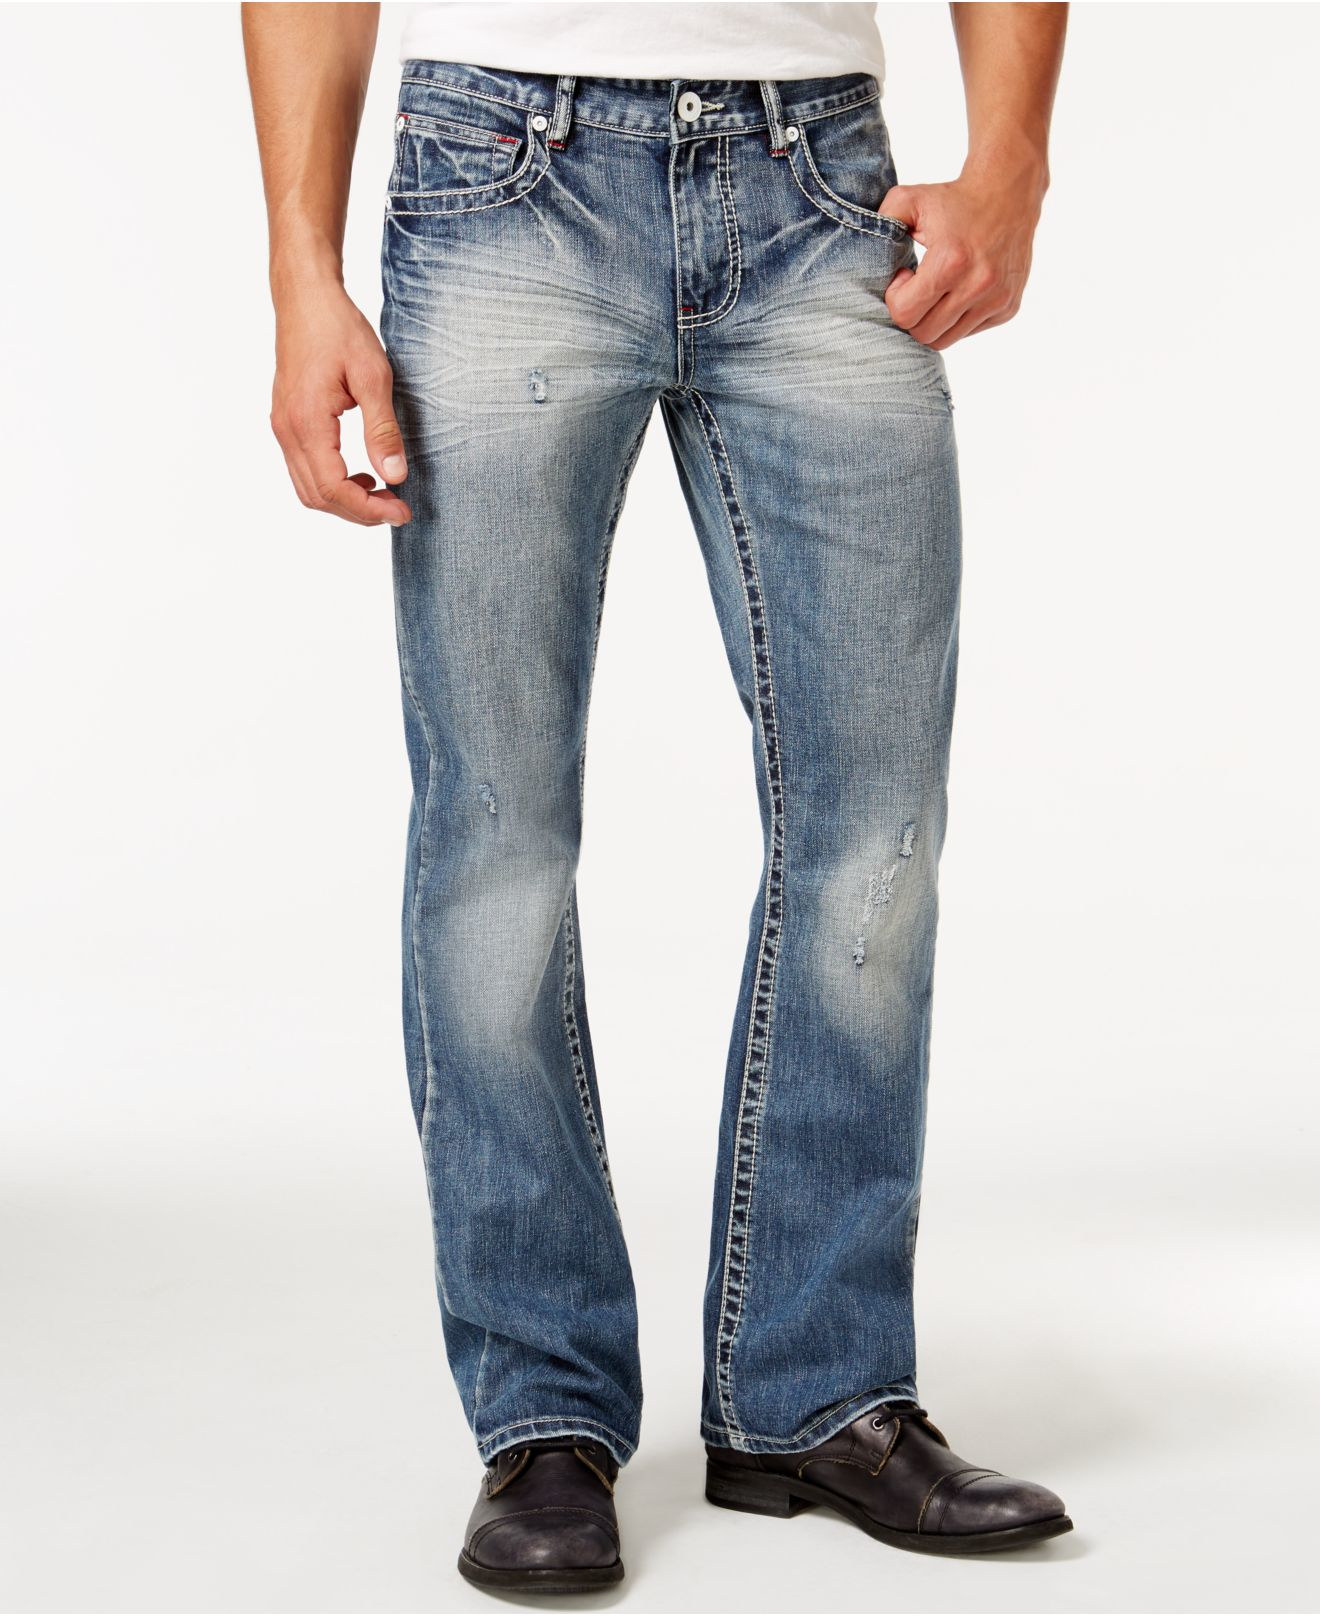 Inc international concepts Men's Boot-cut Medium Wash Jeans, Only At ...